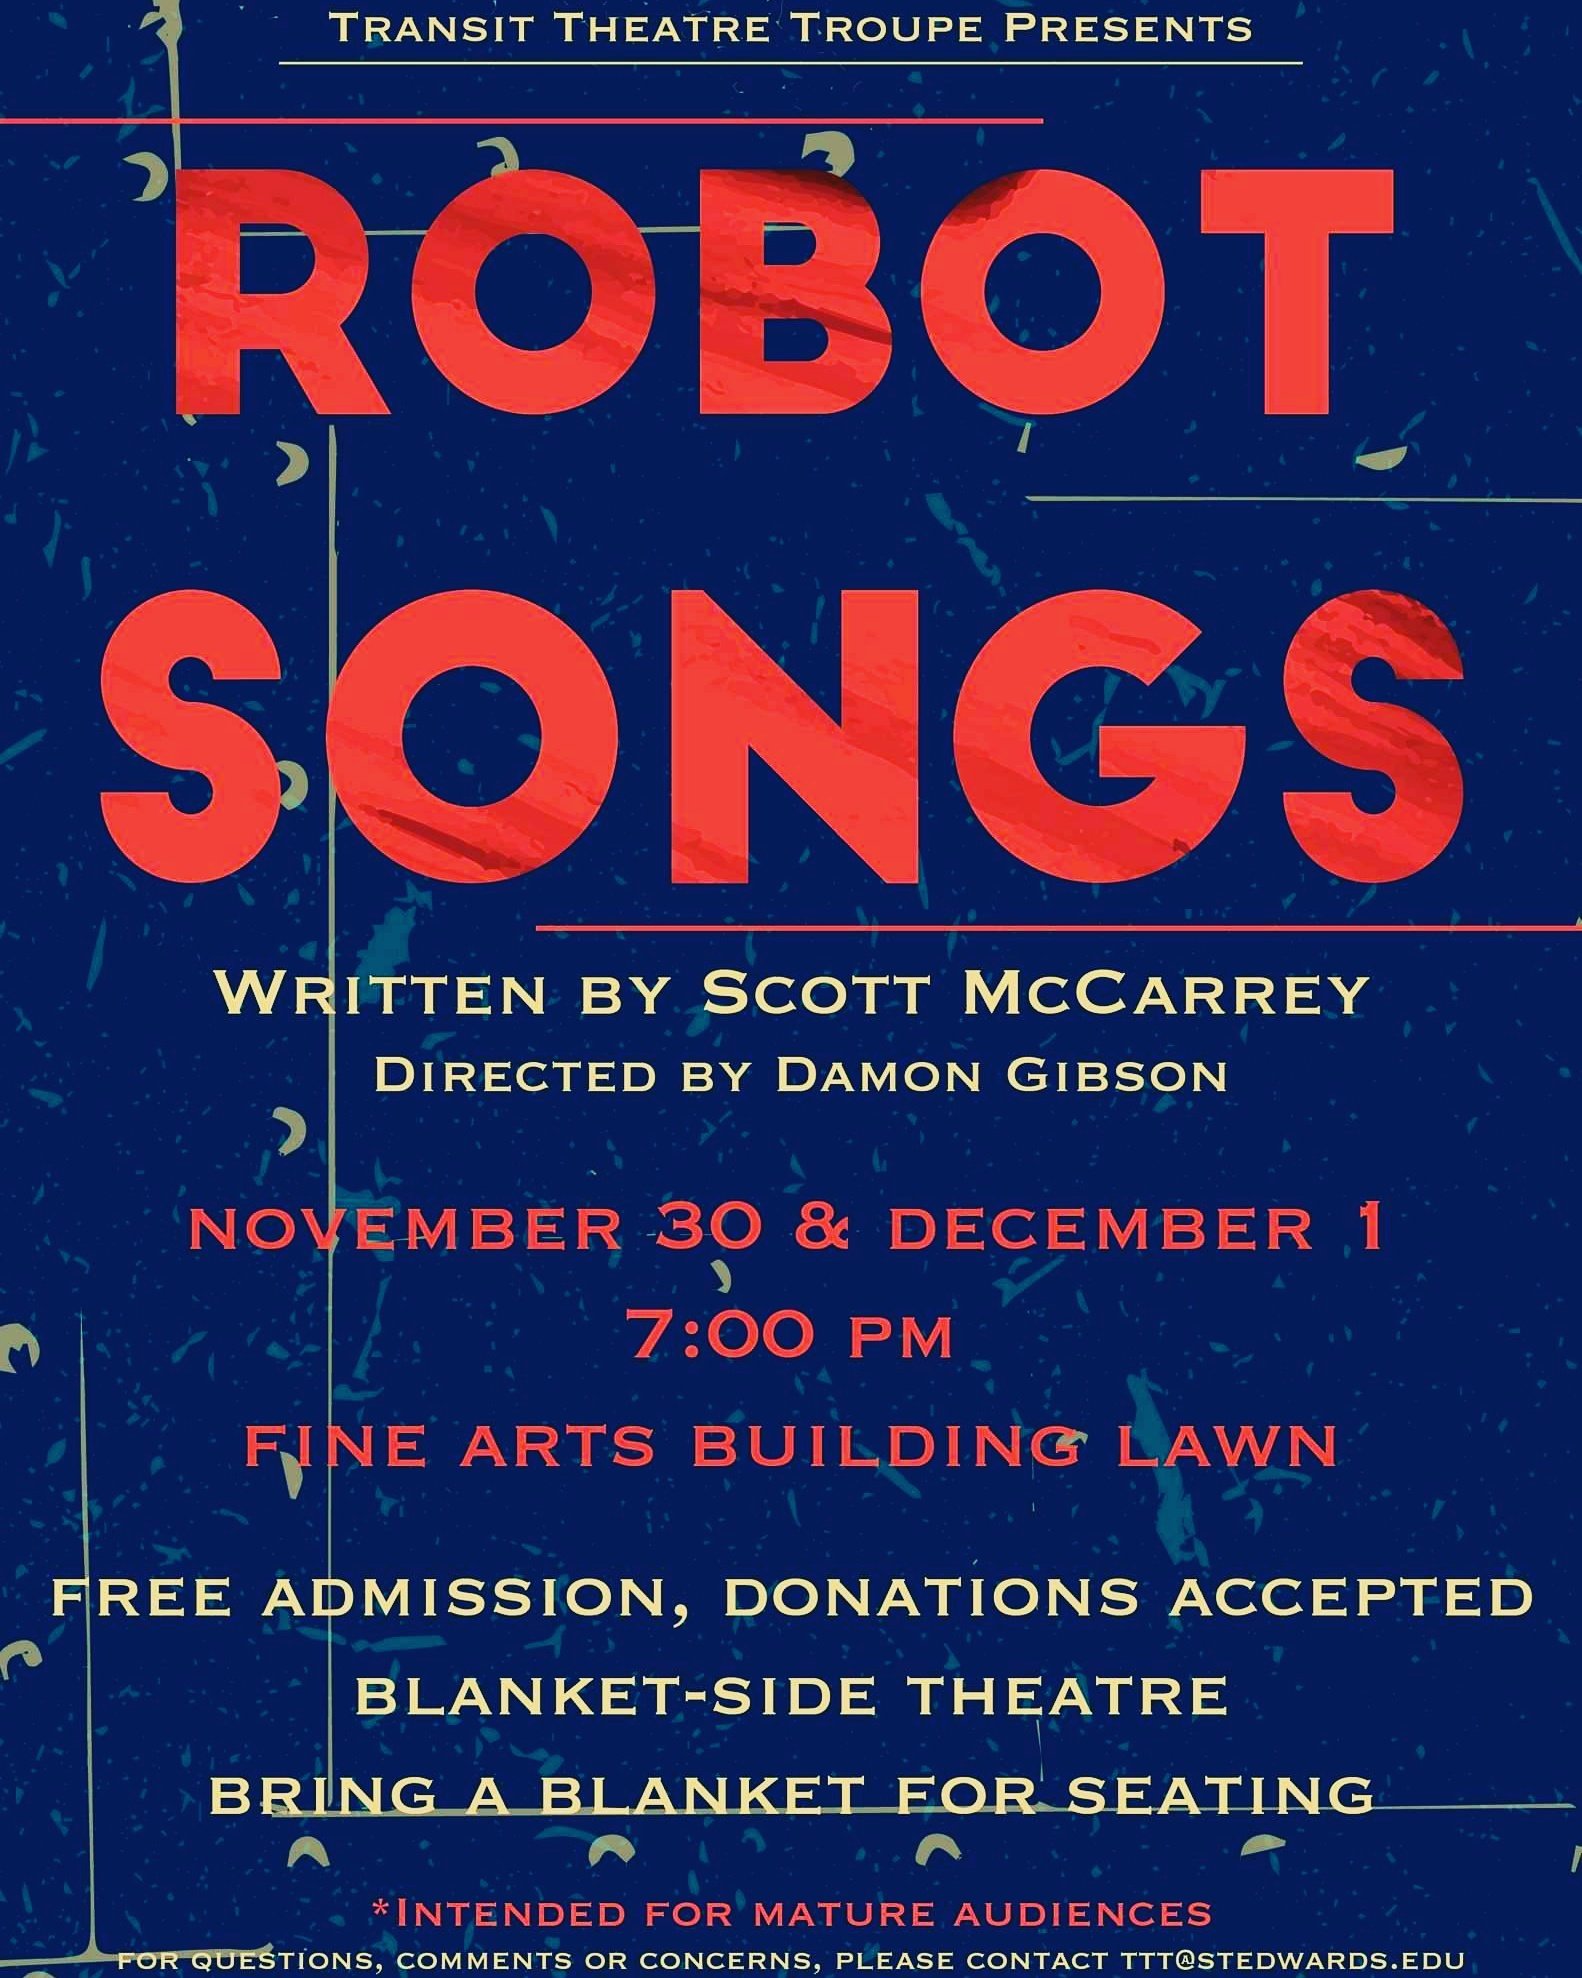 Robot songs by Transit Theatre Troupe